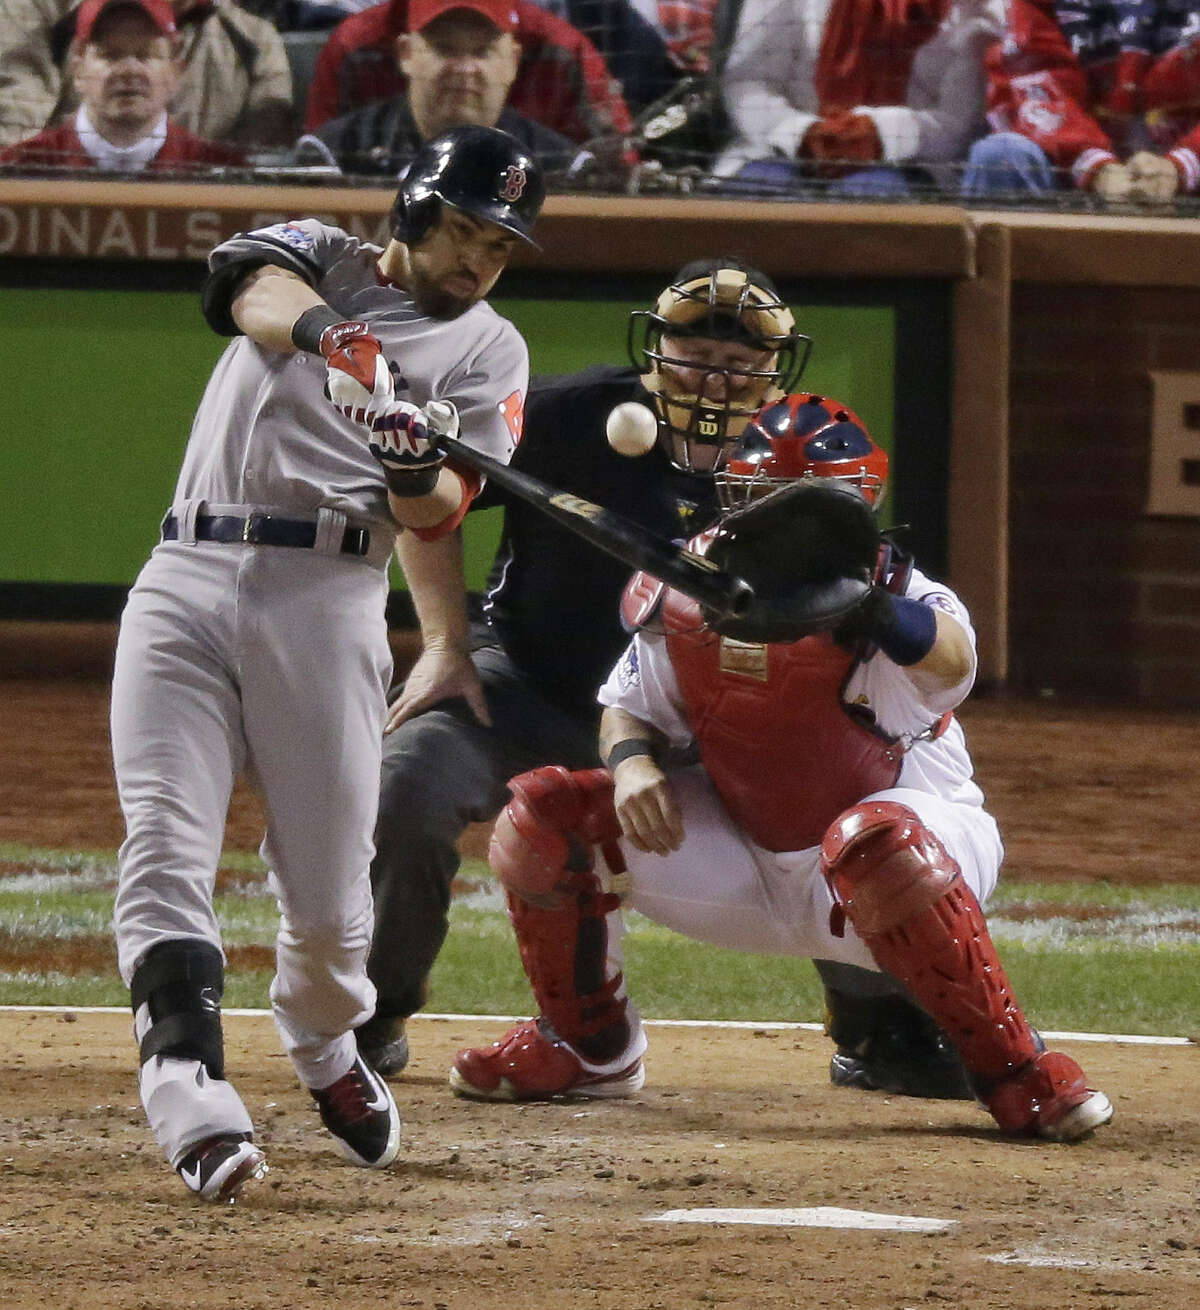 Jacoby Ellsbury of the Red Sox delivers an RBI single in the seventh inning to produce Boston's third run of Game 5 against the Cardinals.